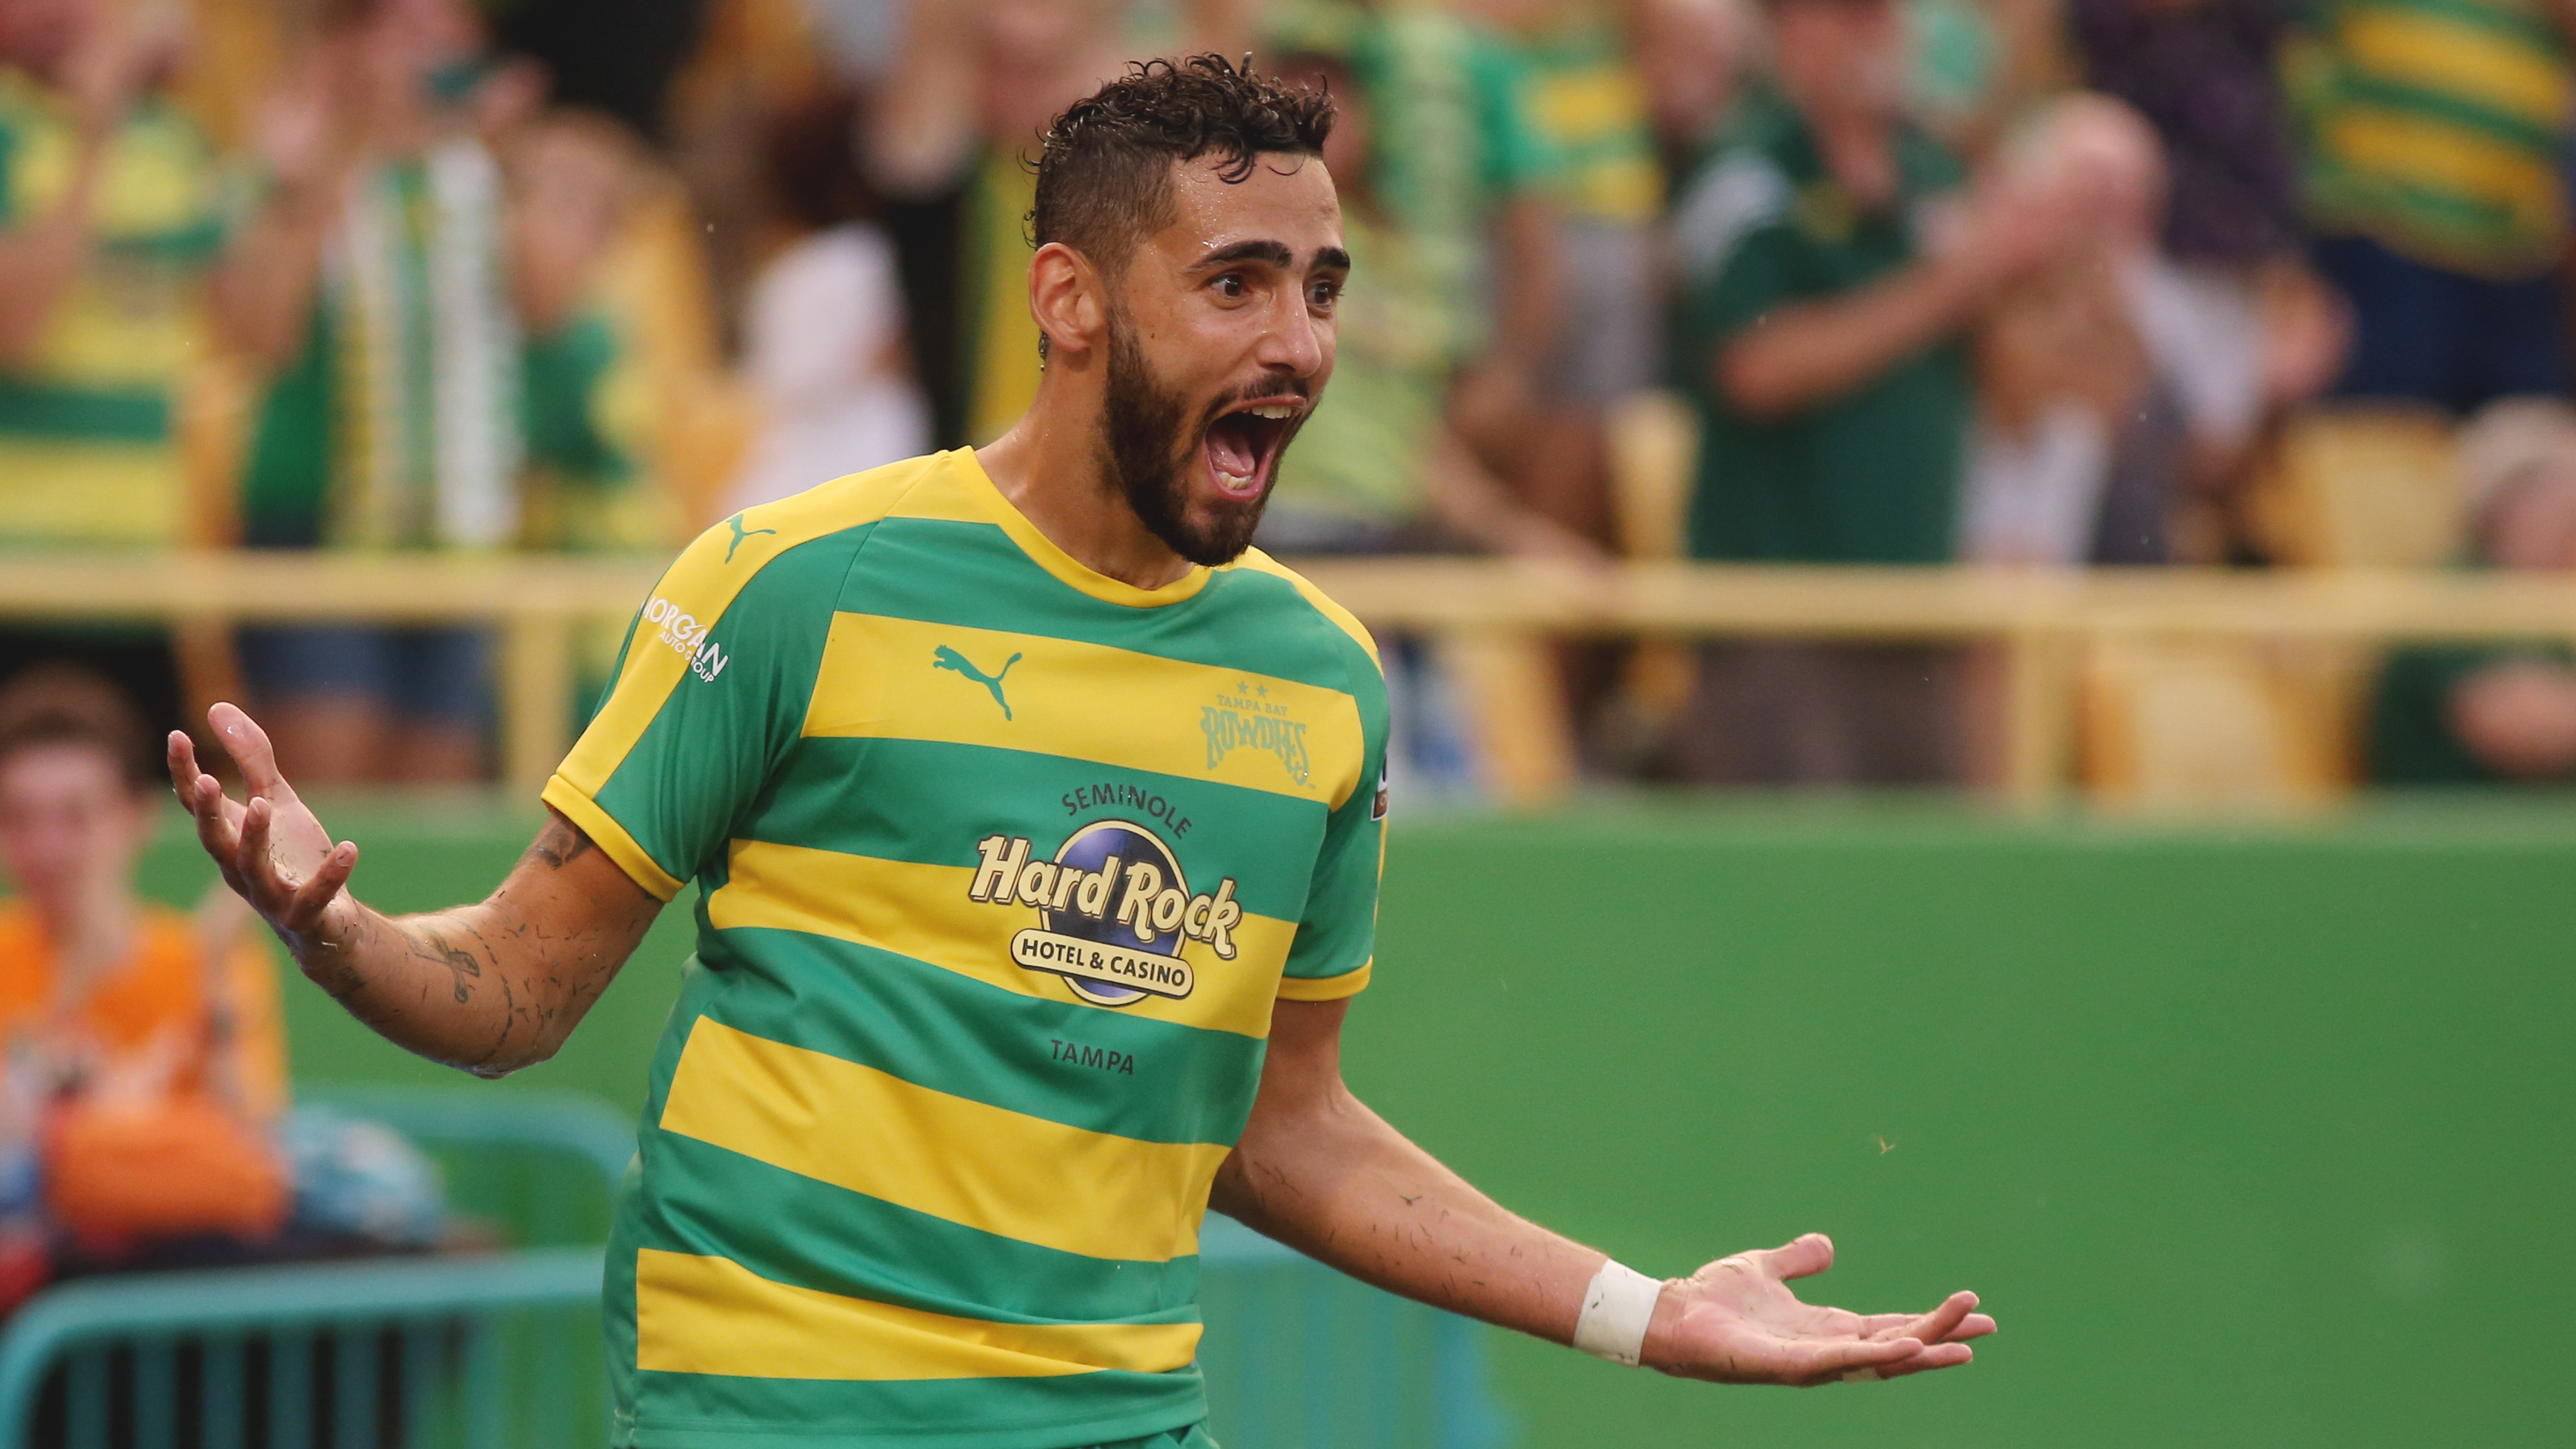 Late goal lifts Rowdies over Memphis 901, into Eastern Conference final